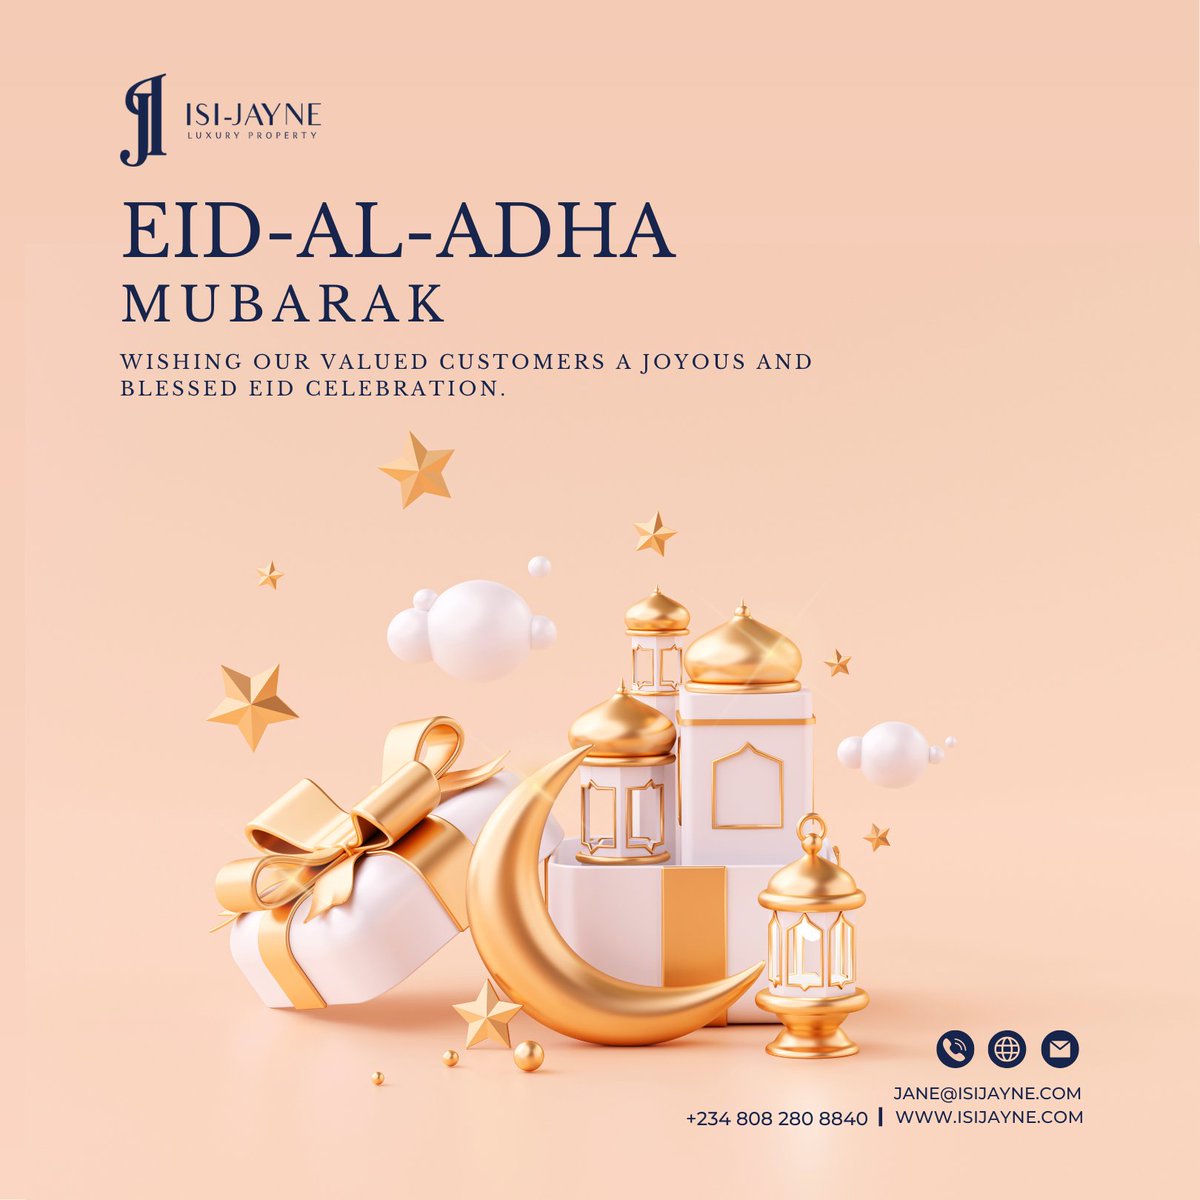 May this Eid bring you abundant joy, peace, and prosperity. 

Thank you for choosing us  as your trusted partner. 

Eid Mubarak to you and your loved ones!

#eidmubarak #eidelkabir